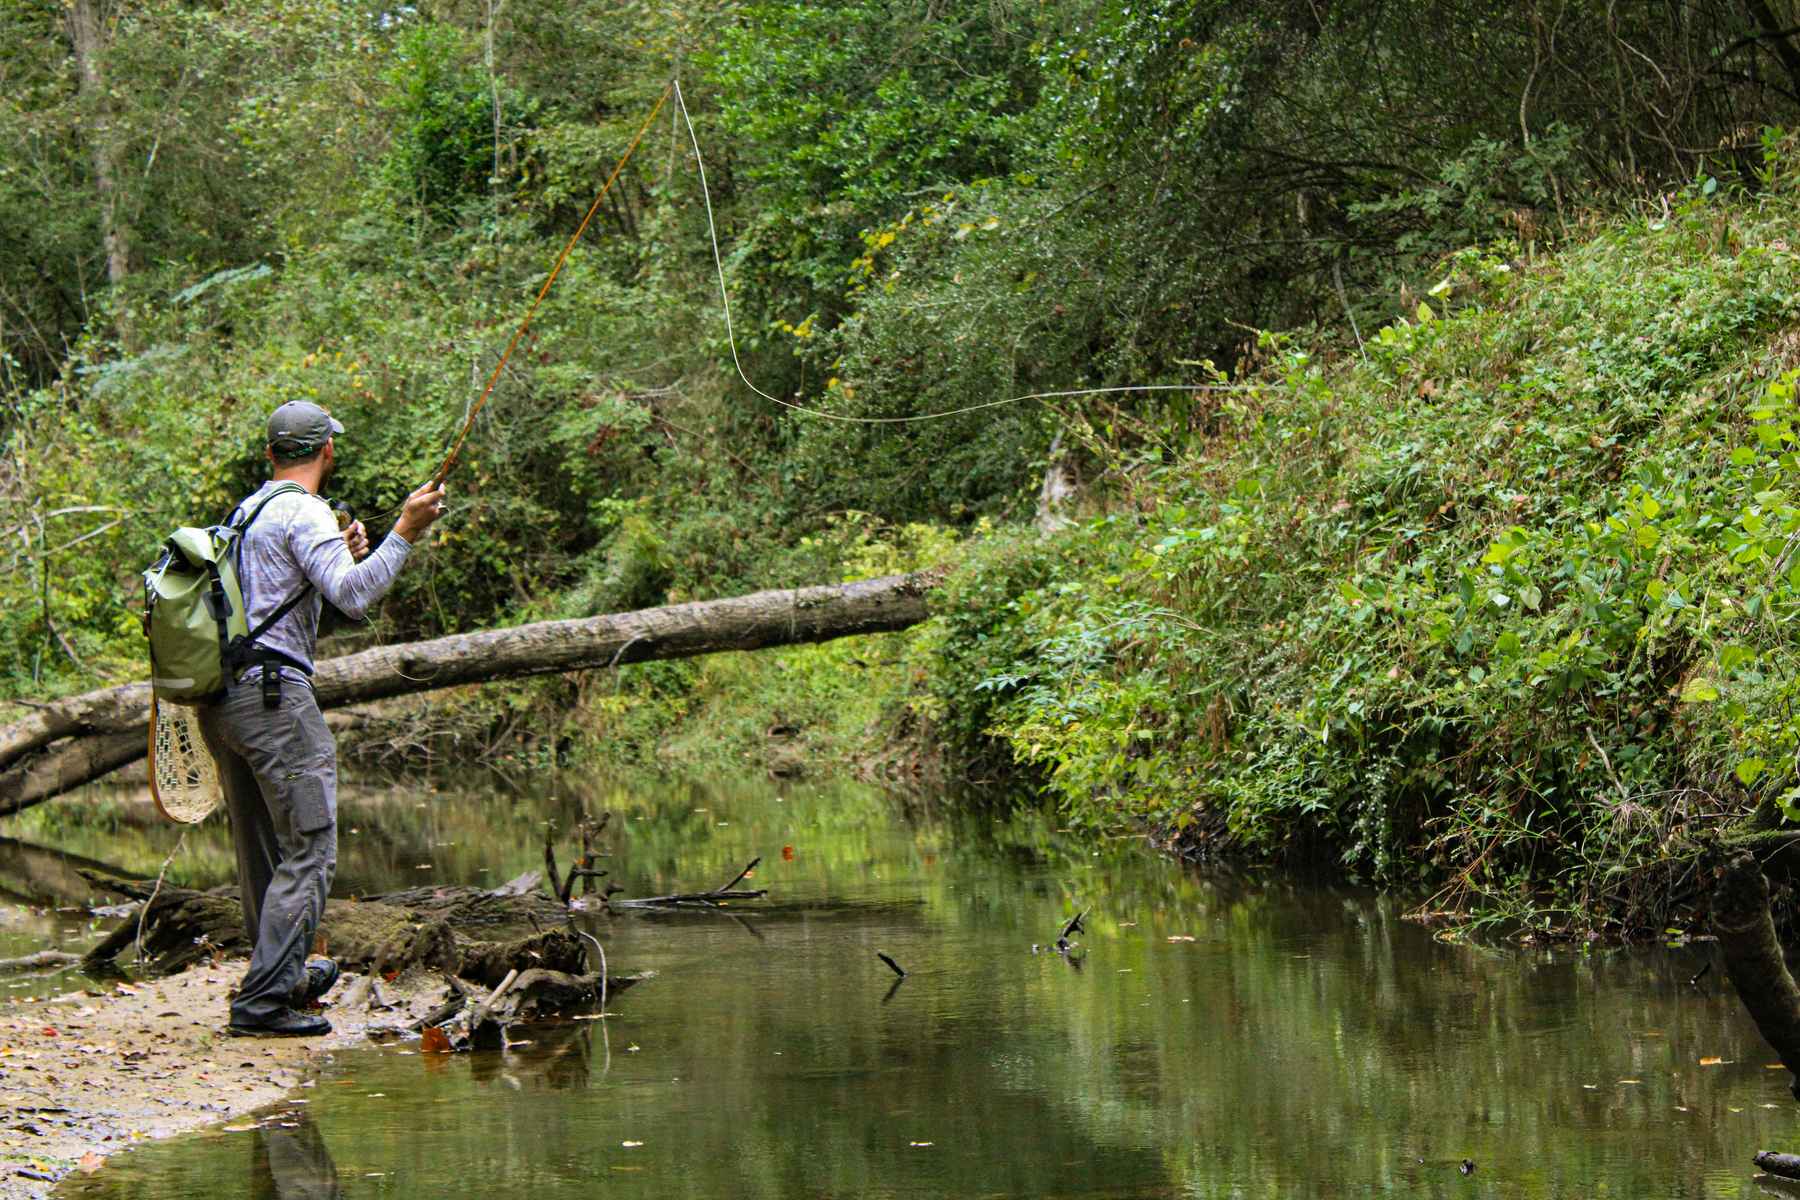 An ode to the Texas creek freak and native spotted bass